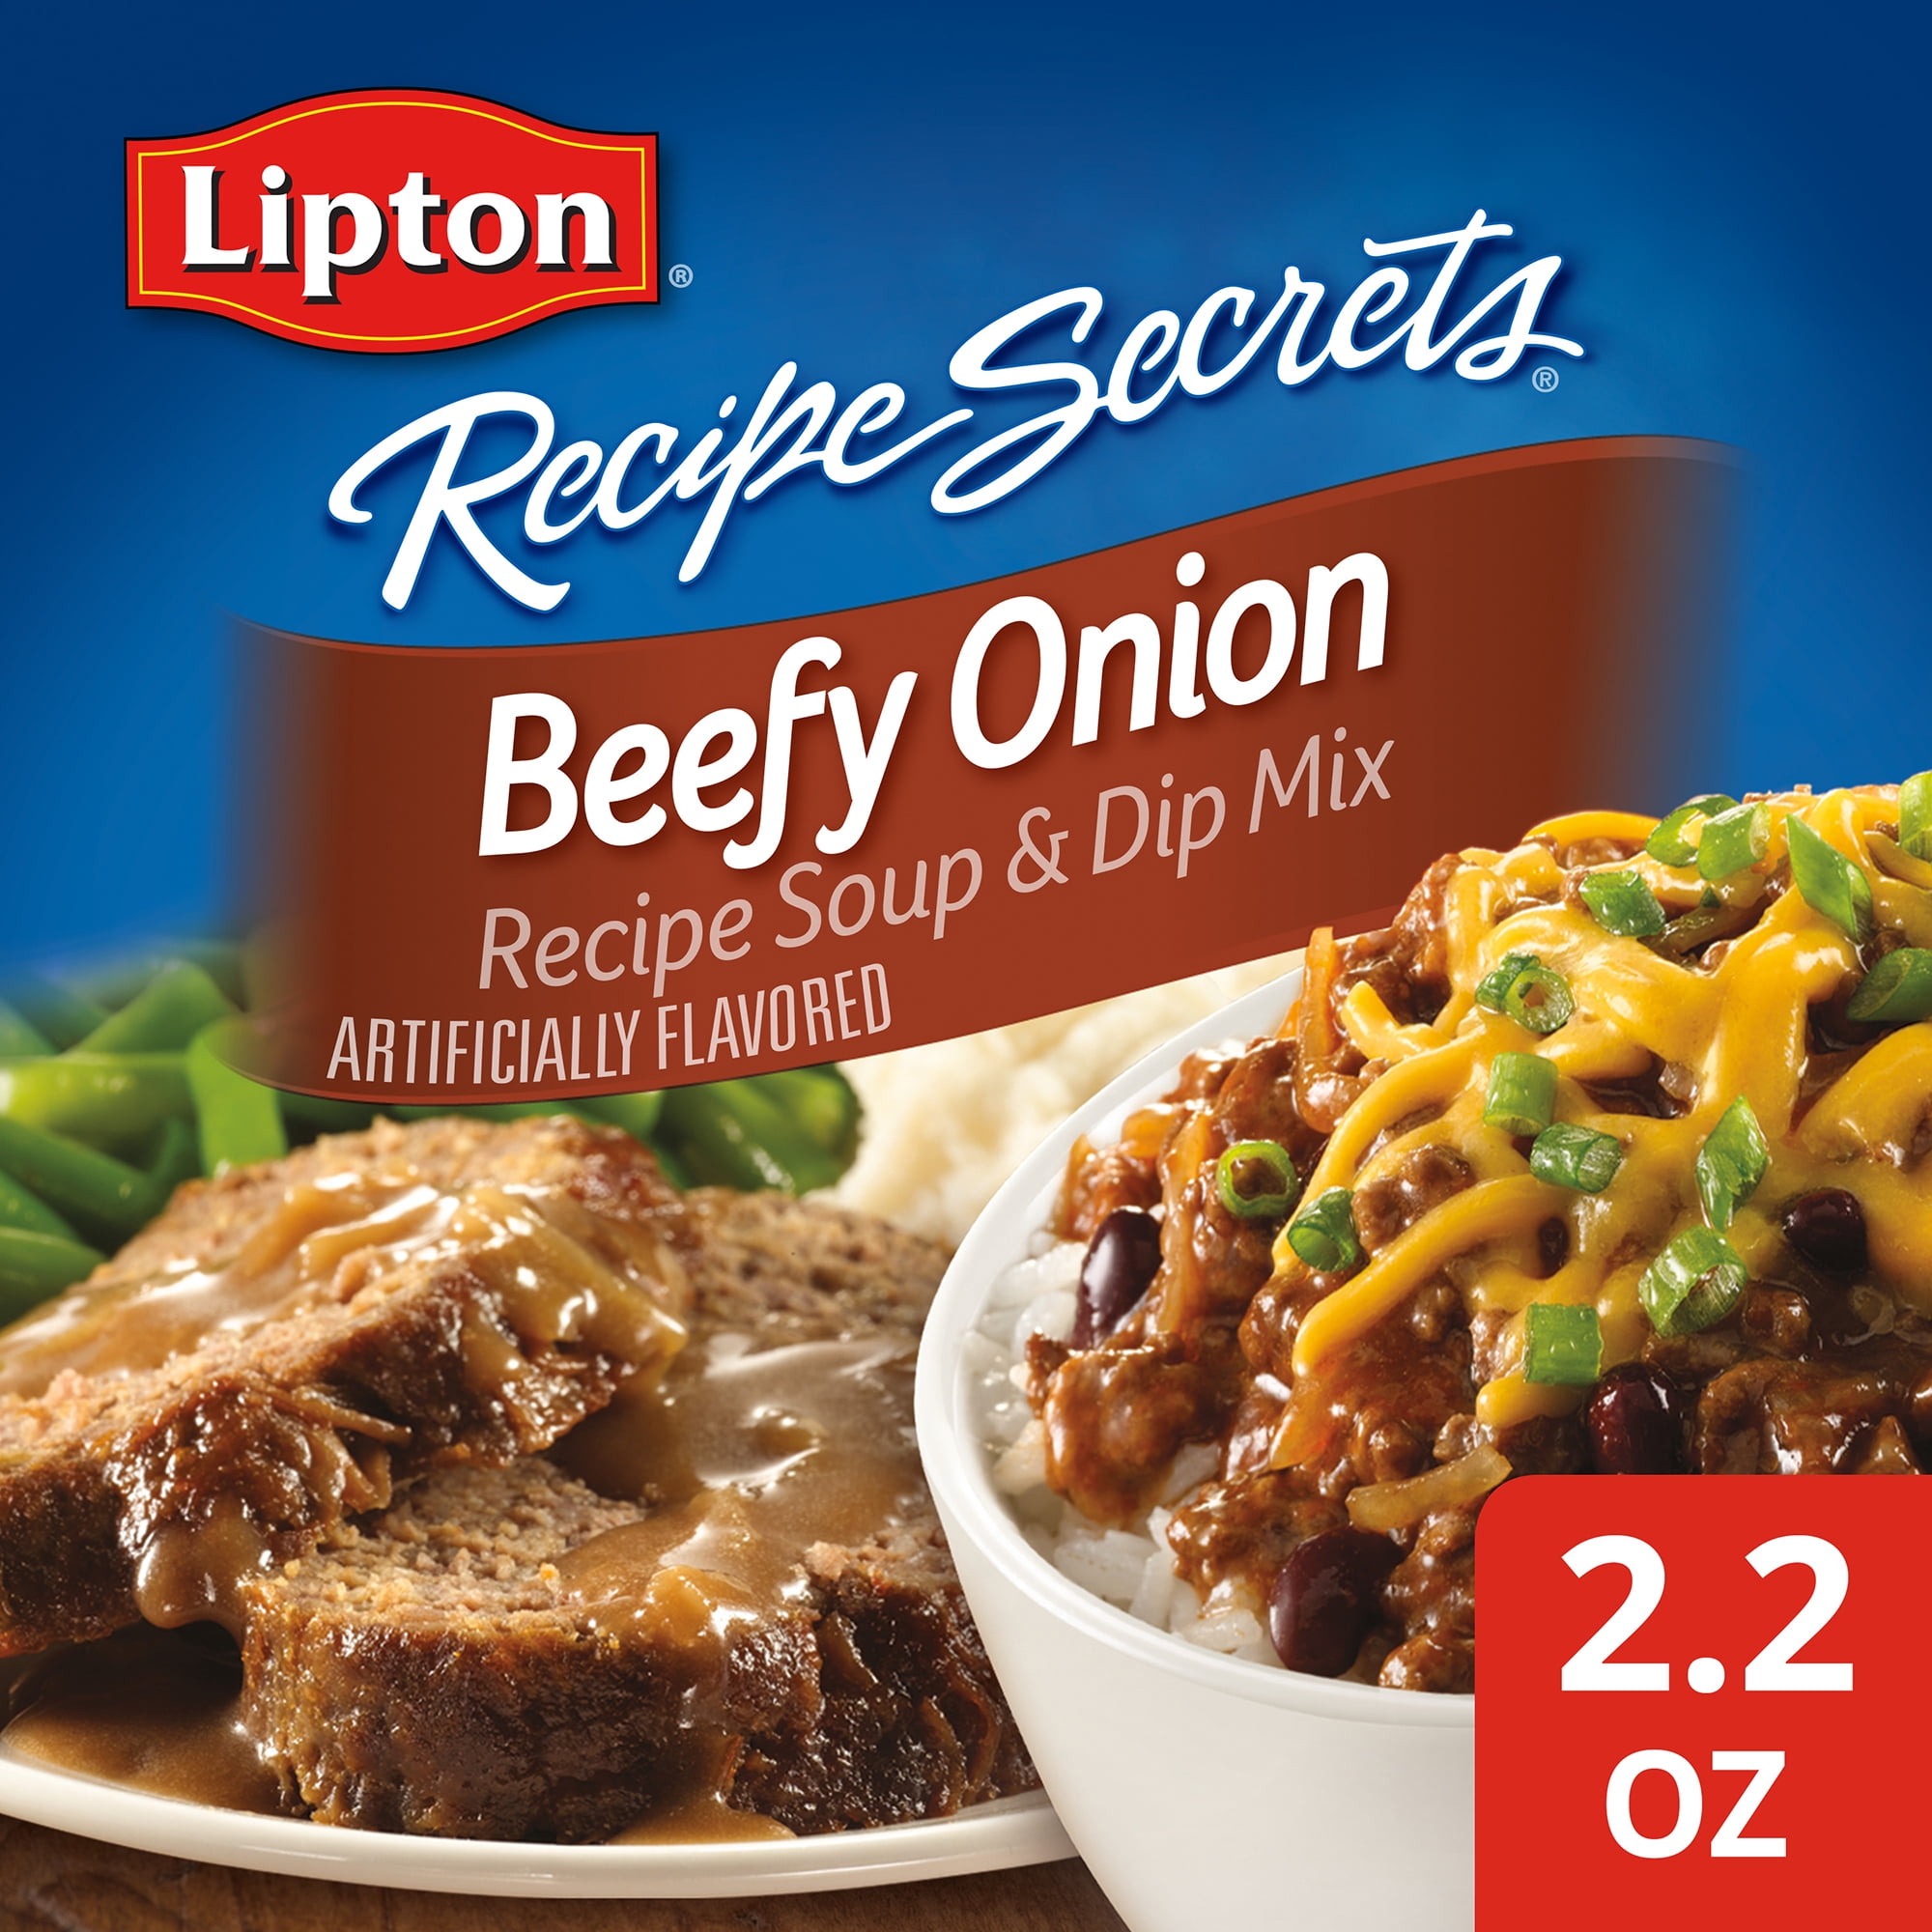 Lipton Onion Soup Mix Burgers - Mommy Hates Cooking